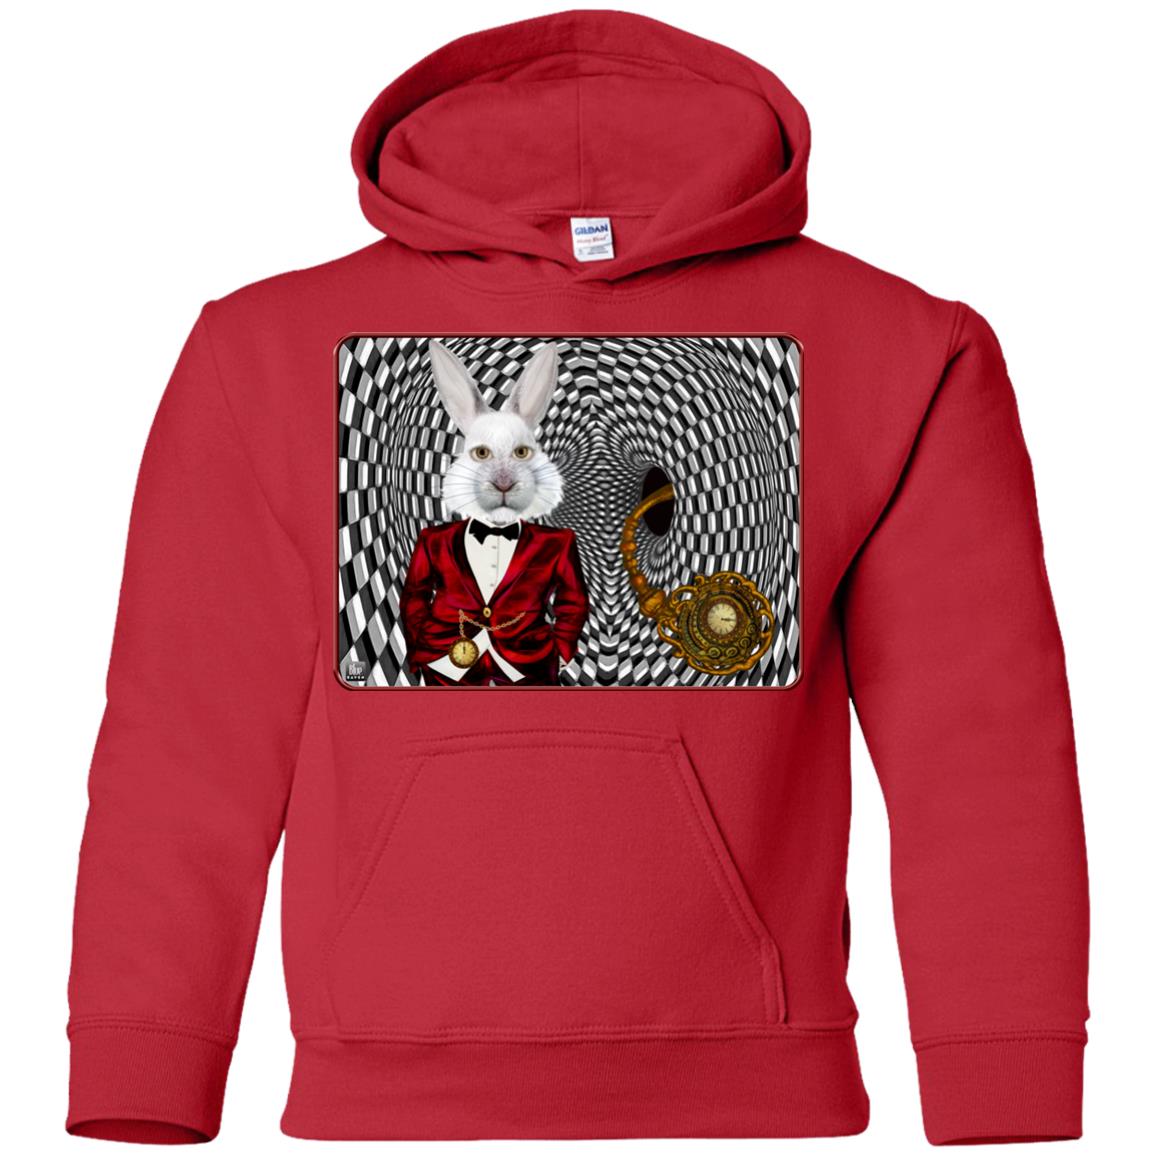 portrait of the white rabbit - Youth Hoodie